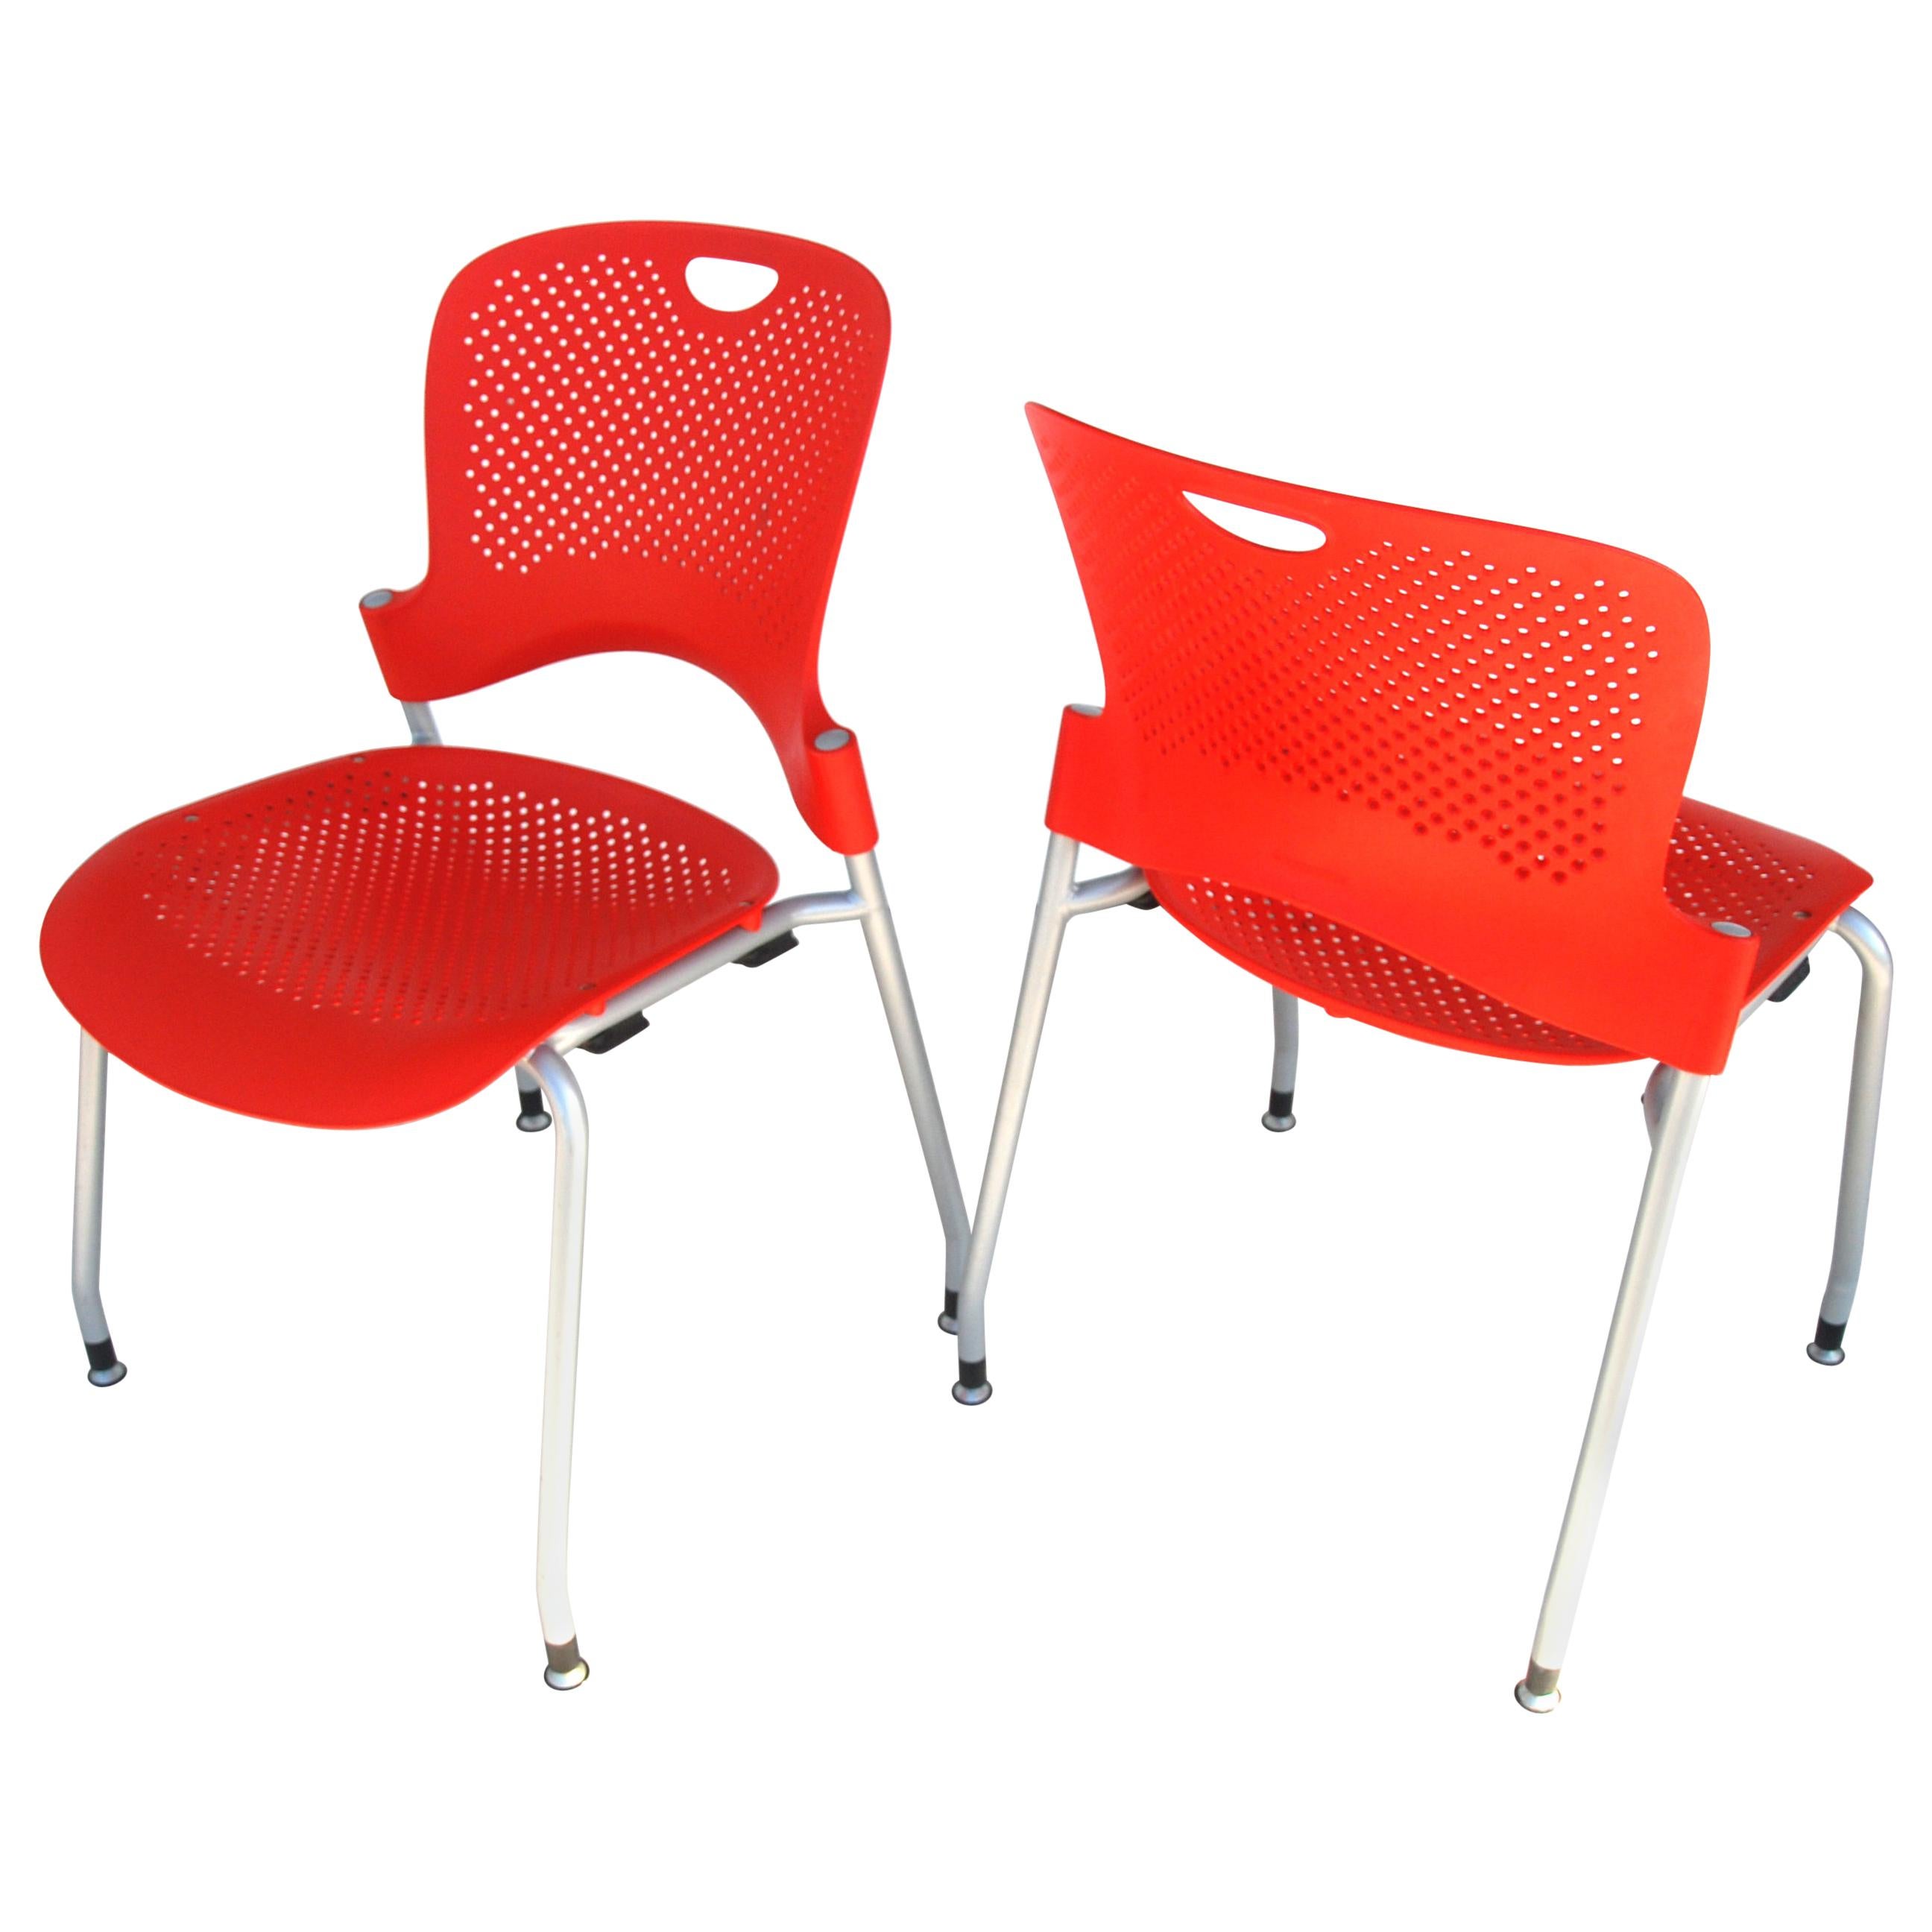 Pair of Red Caper Stacking Chairs by Jeff Weber for Herman Miller